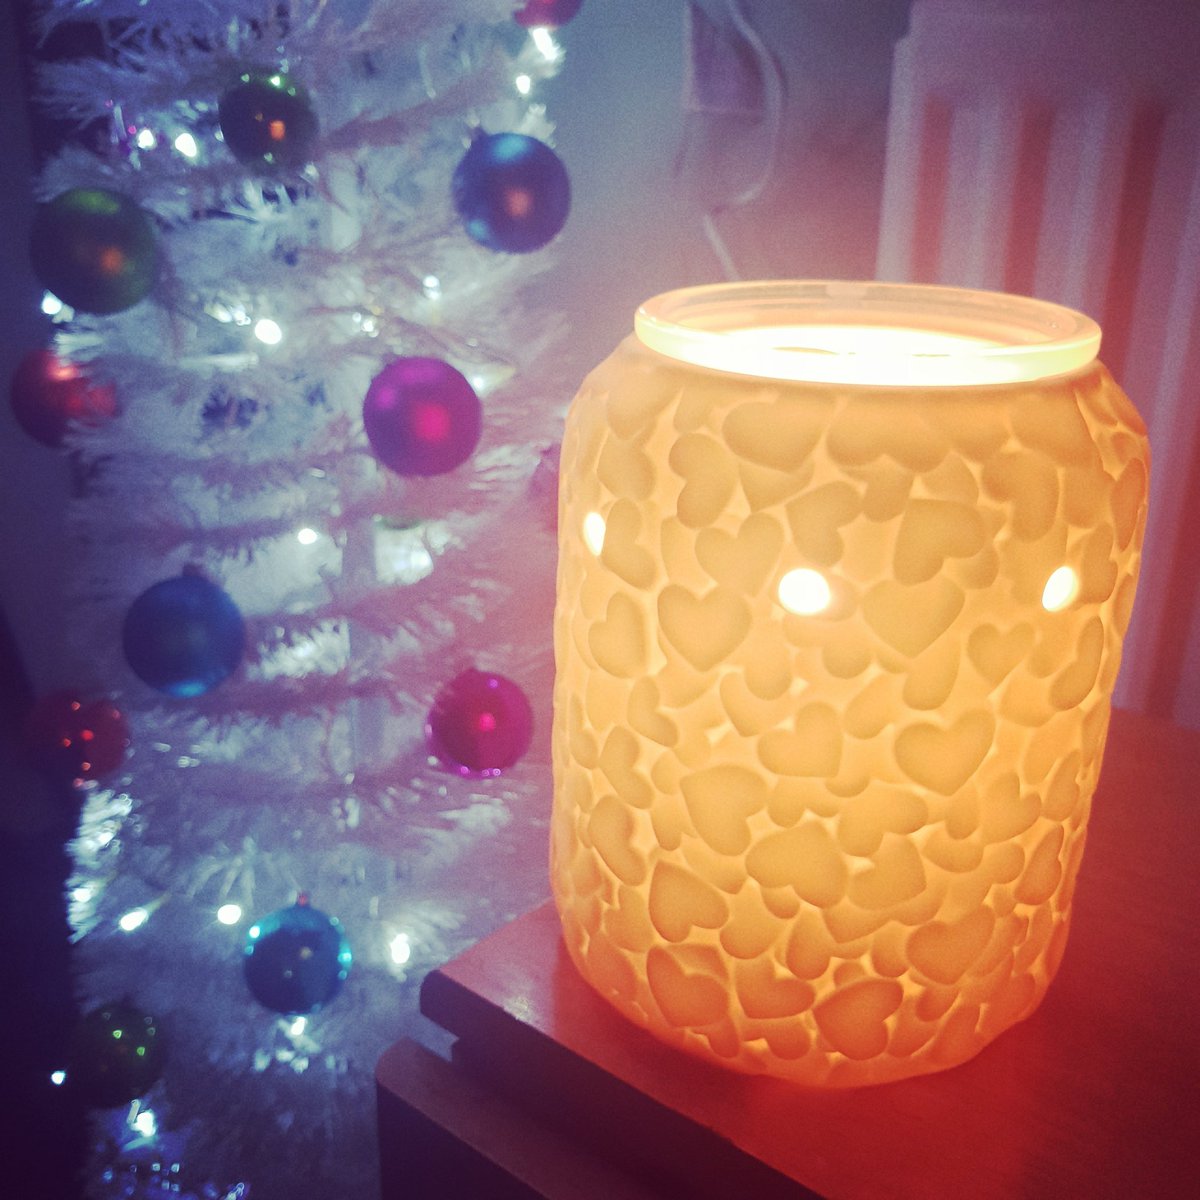 OBSESSED with my new Scentsy wax melt burner! #scentsy #scentsywarmer #passionfruitcolada